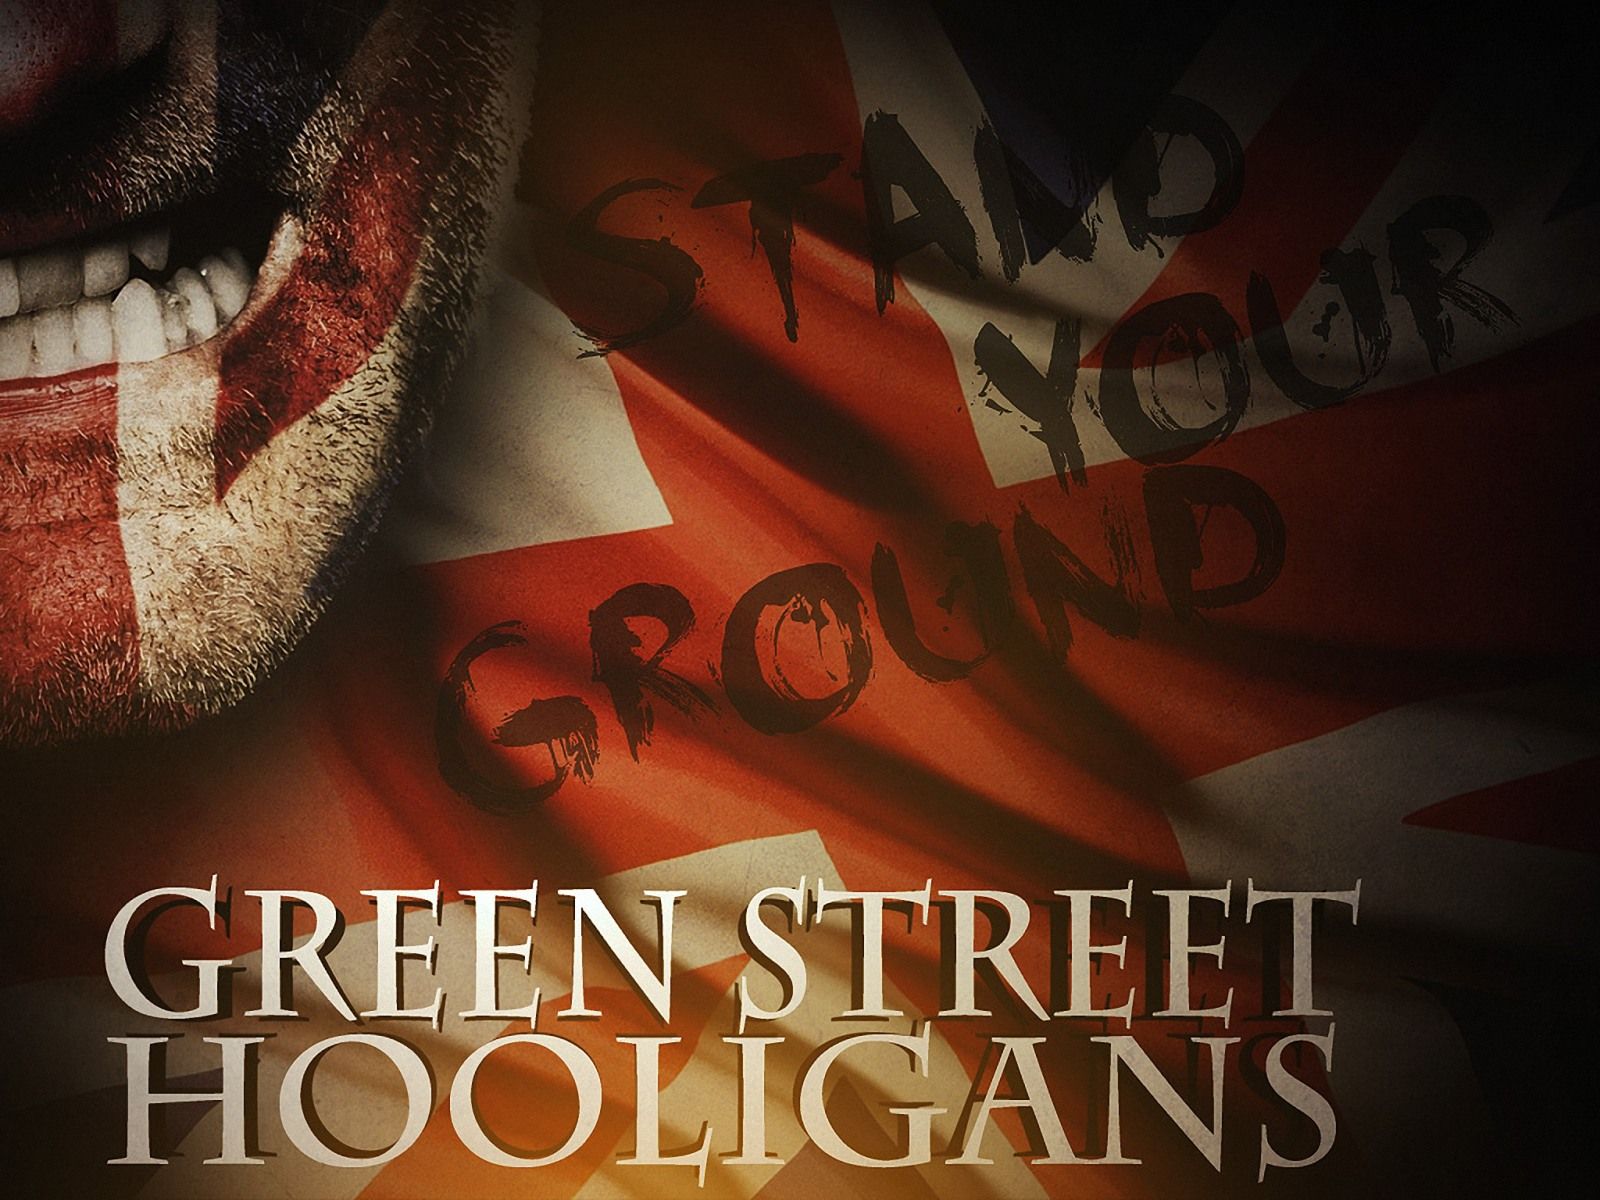 Green Street Hooligans pics and logo. Photo and image of Green Street Hooligans